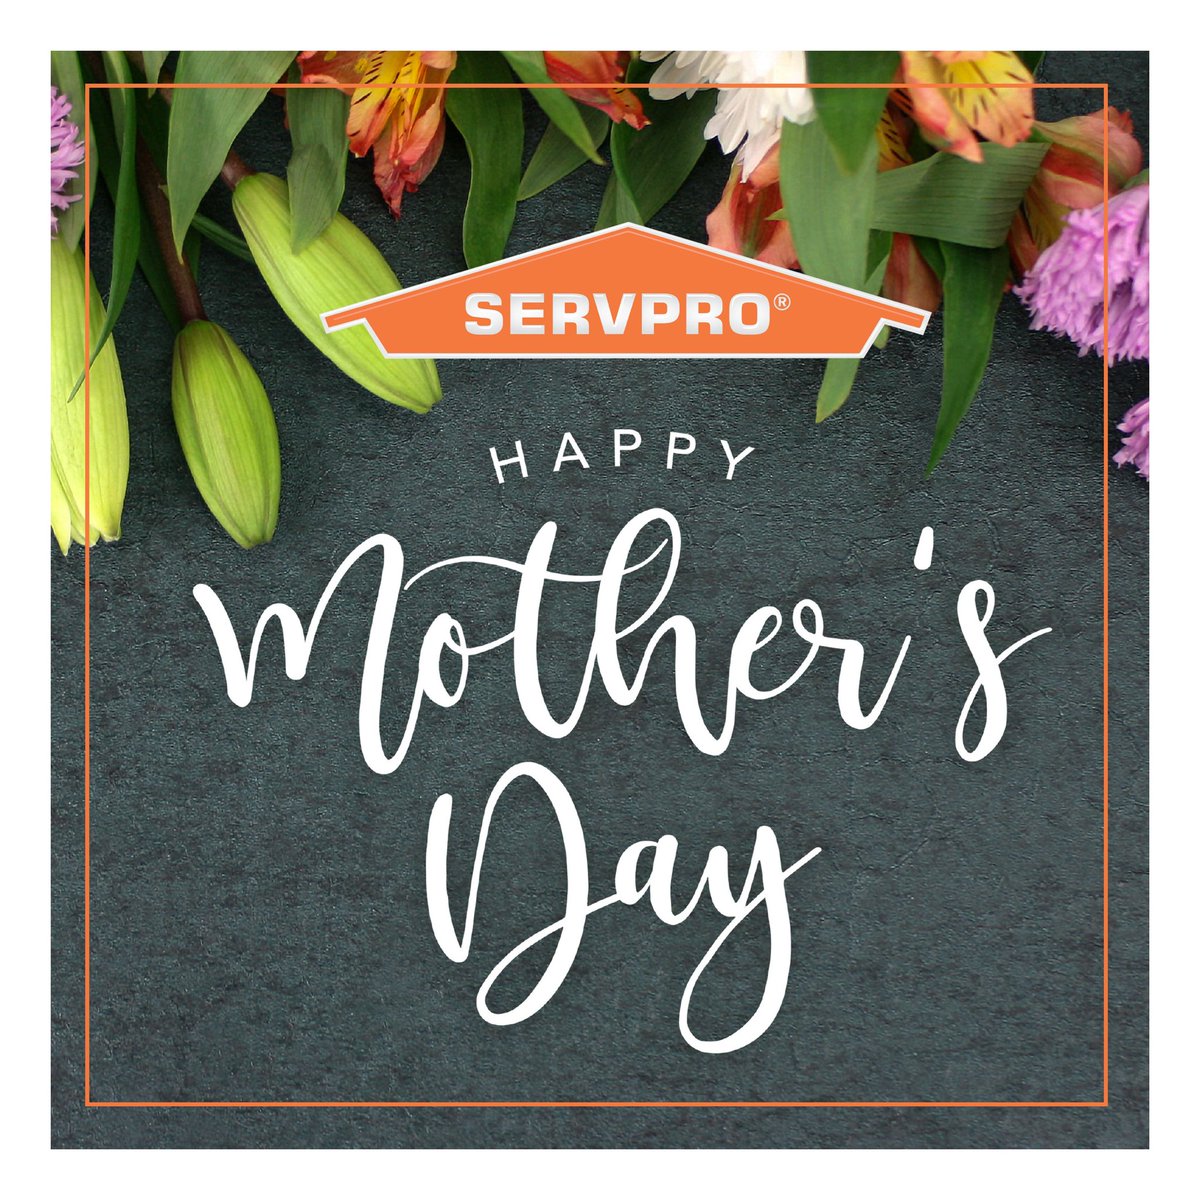 Happy Mother's Day, from your SERVPRO Family! 💚🧡